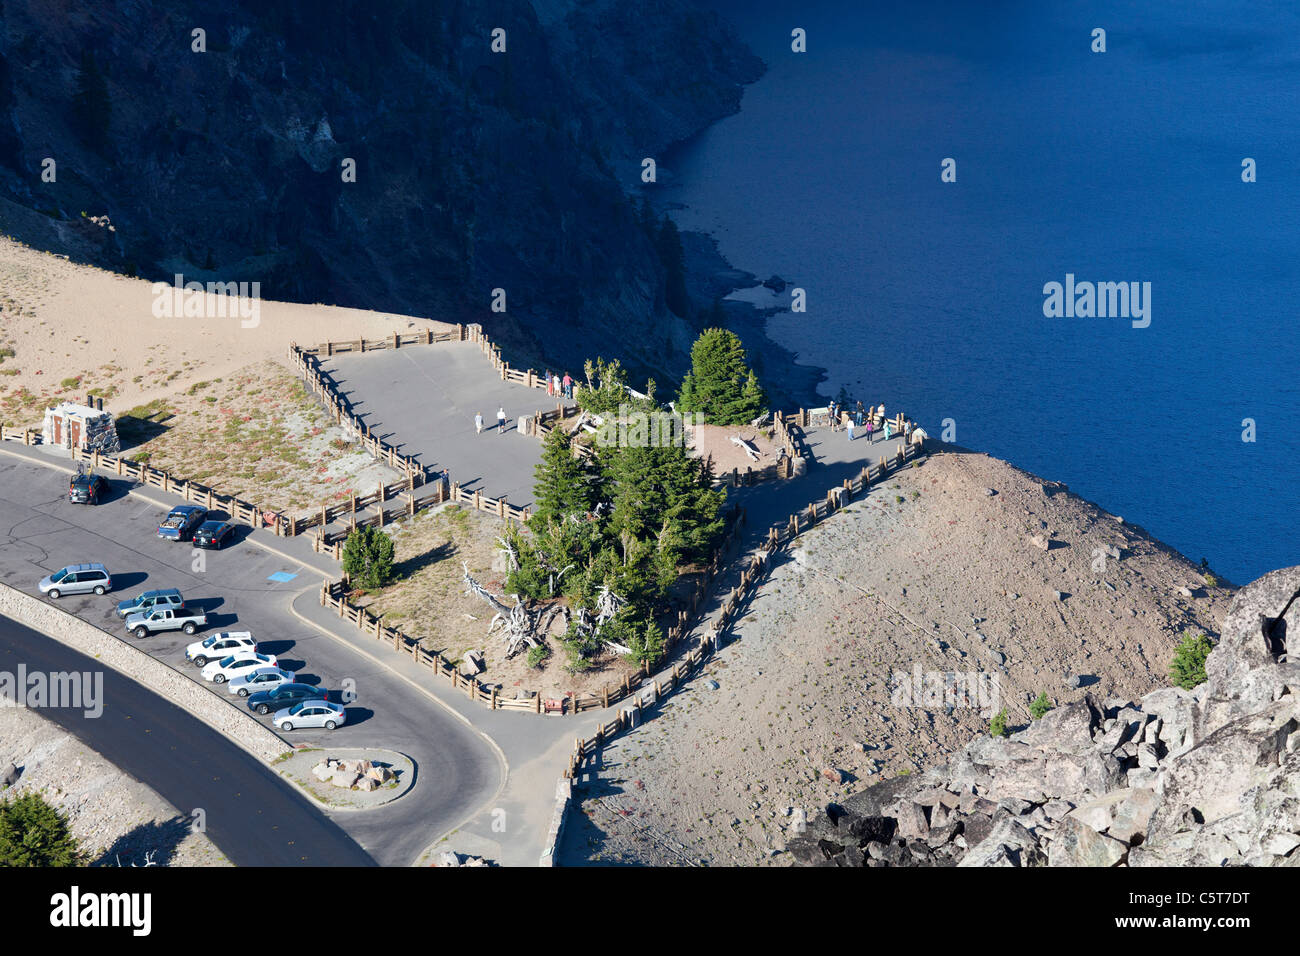 Car park and viewing area at Crater lake Oregon USA from the Watchman peak. Stock Photo